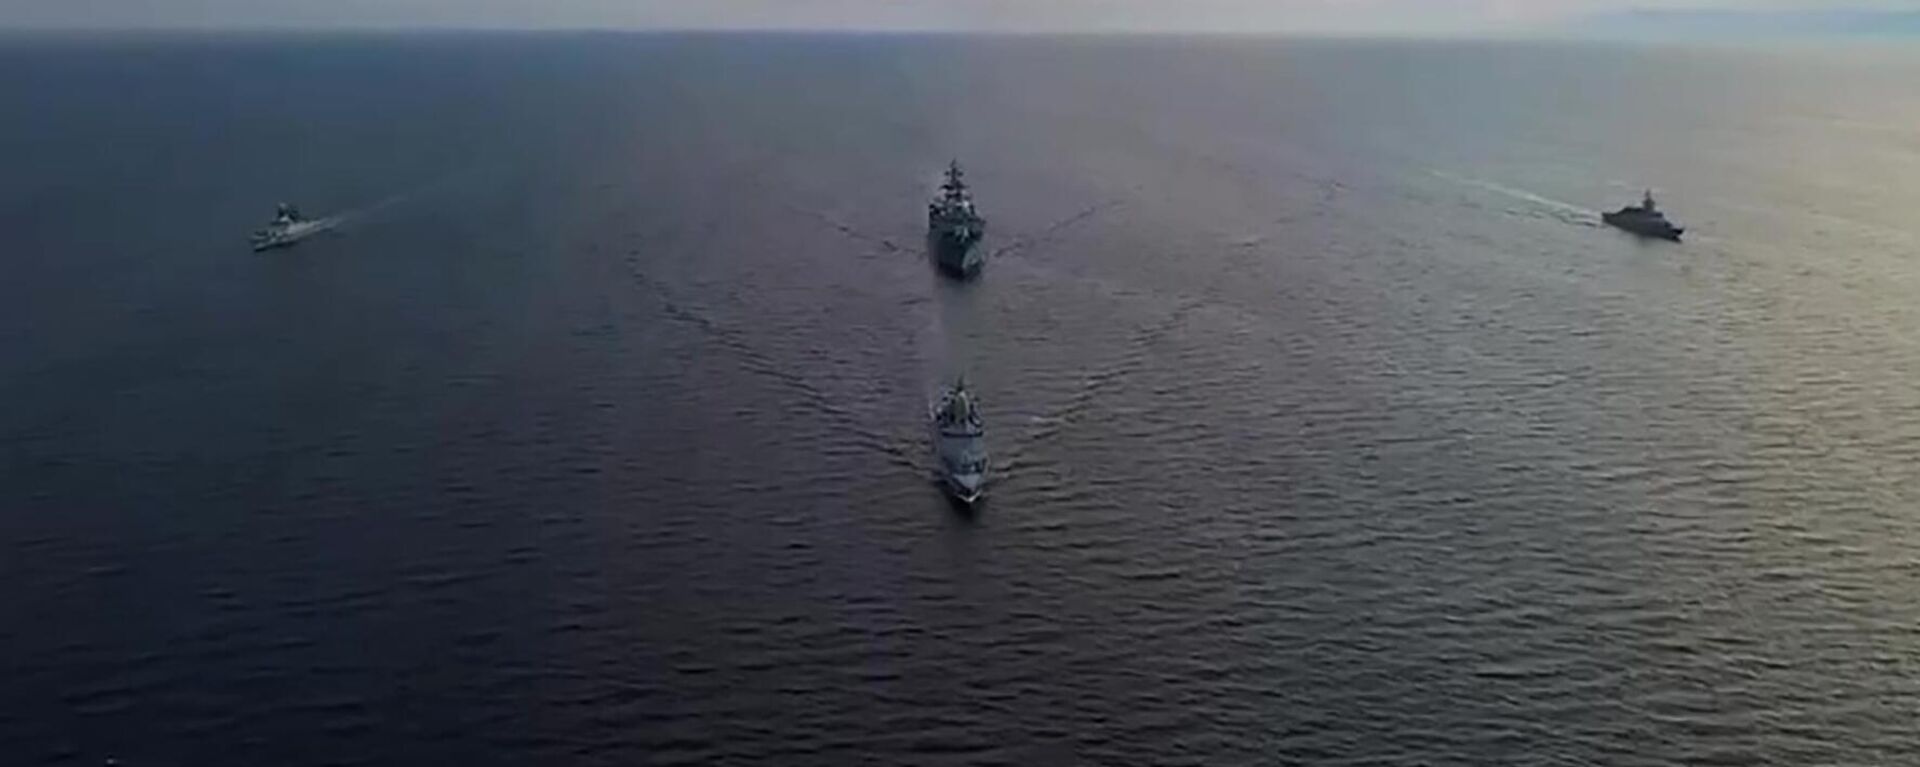 Russian and Chinese warships meet in the Sea of Japan during the Vostok-2022 military exercises - Sputnik International, 1920, 22.12.2022